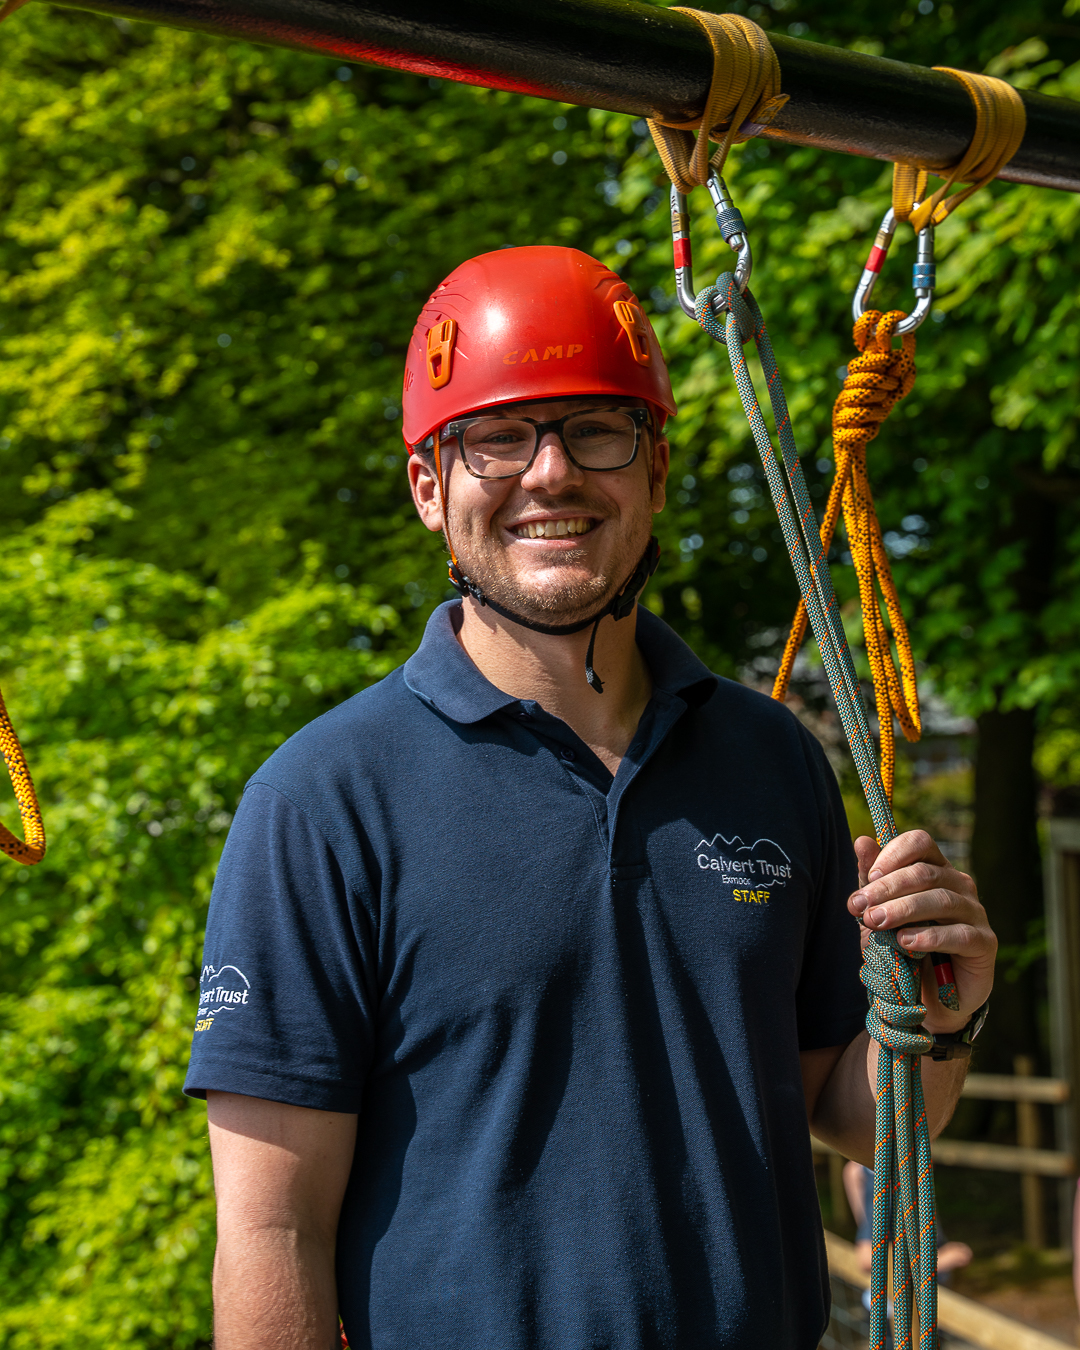 A member of Calvert Exmoor staff, Chief Instructor Tom, is wearing a navy blue Calvert polo shirt, a red helmet and glasses and is holding some ropes tied to a carabiner, smiling at the camera.